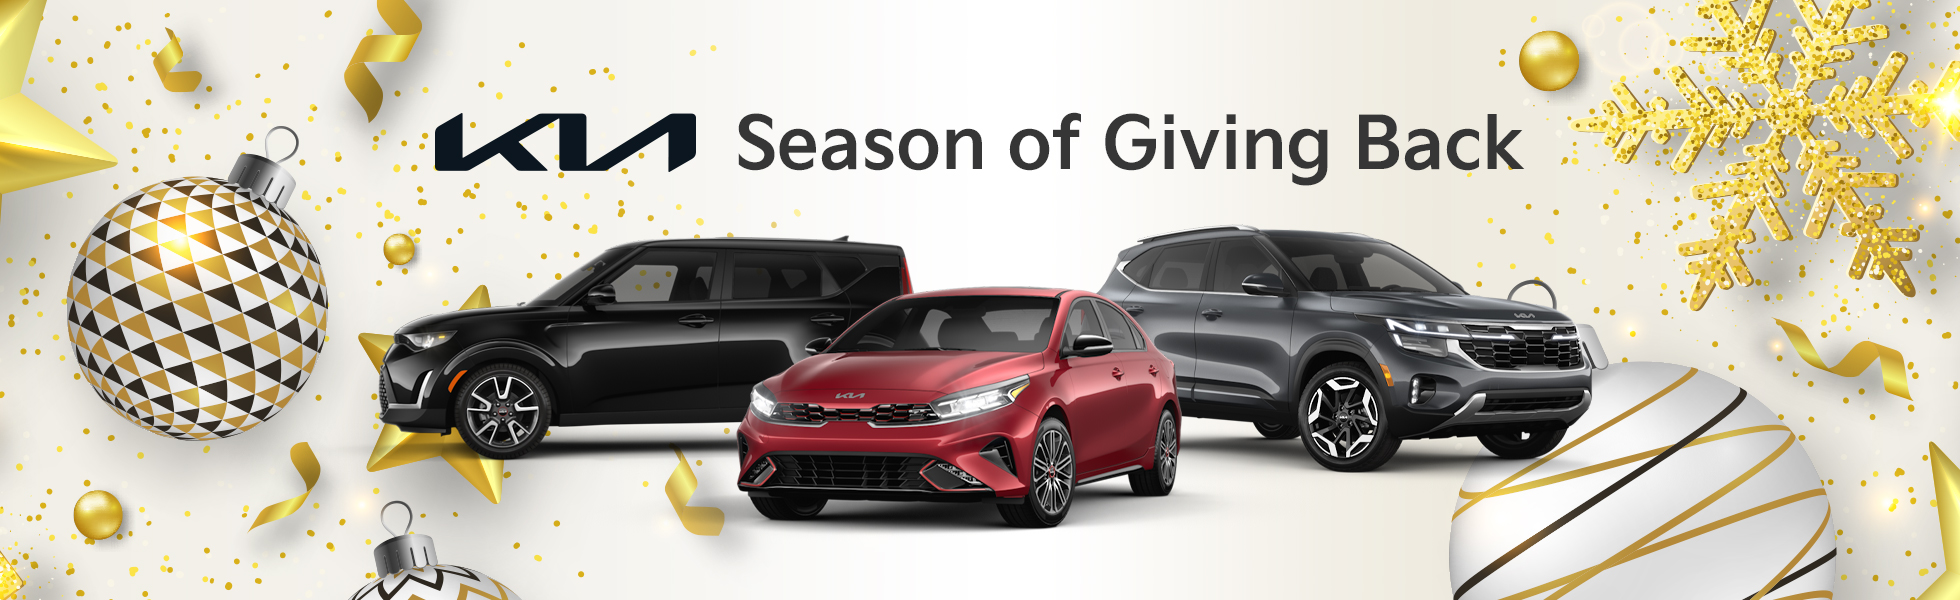 Kia Season of Giving Back Sales Event banner featuring multiple Kia models on display and winter holiday decorations